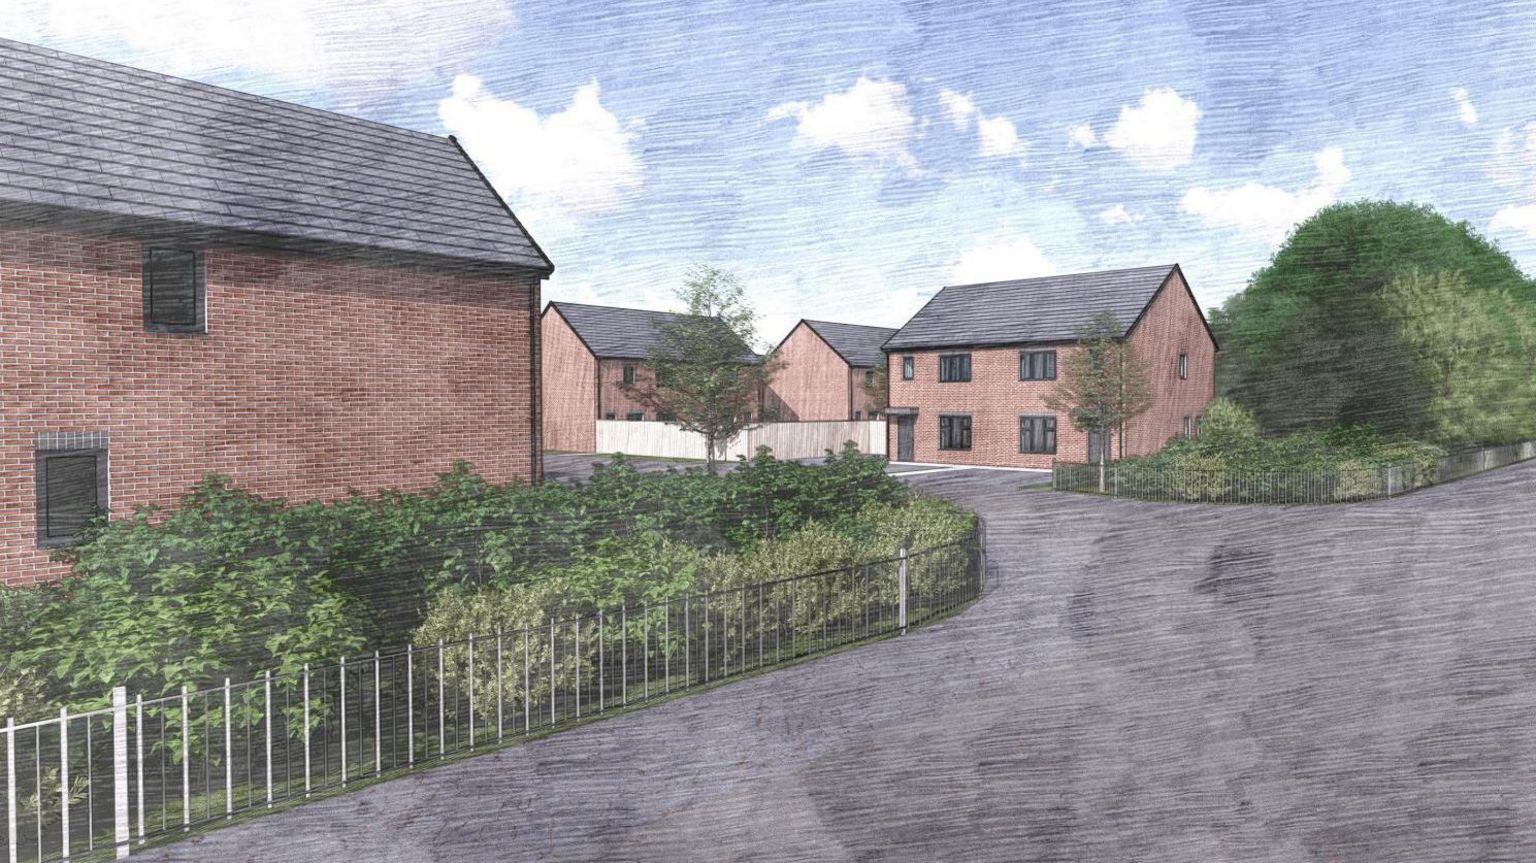 A drawing of the proposed homes